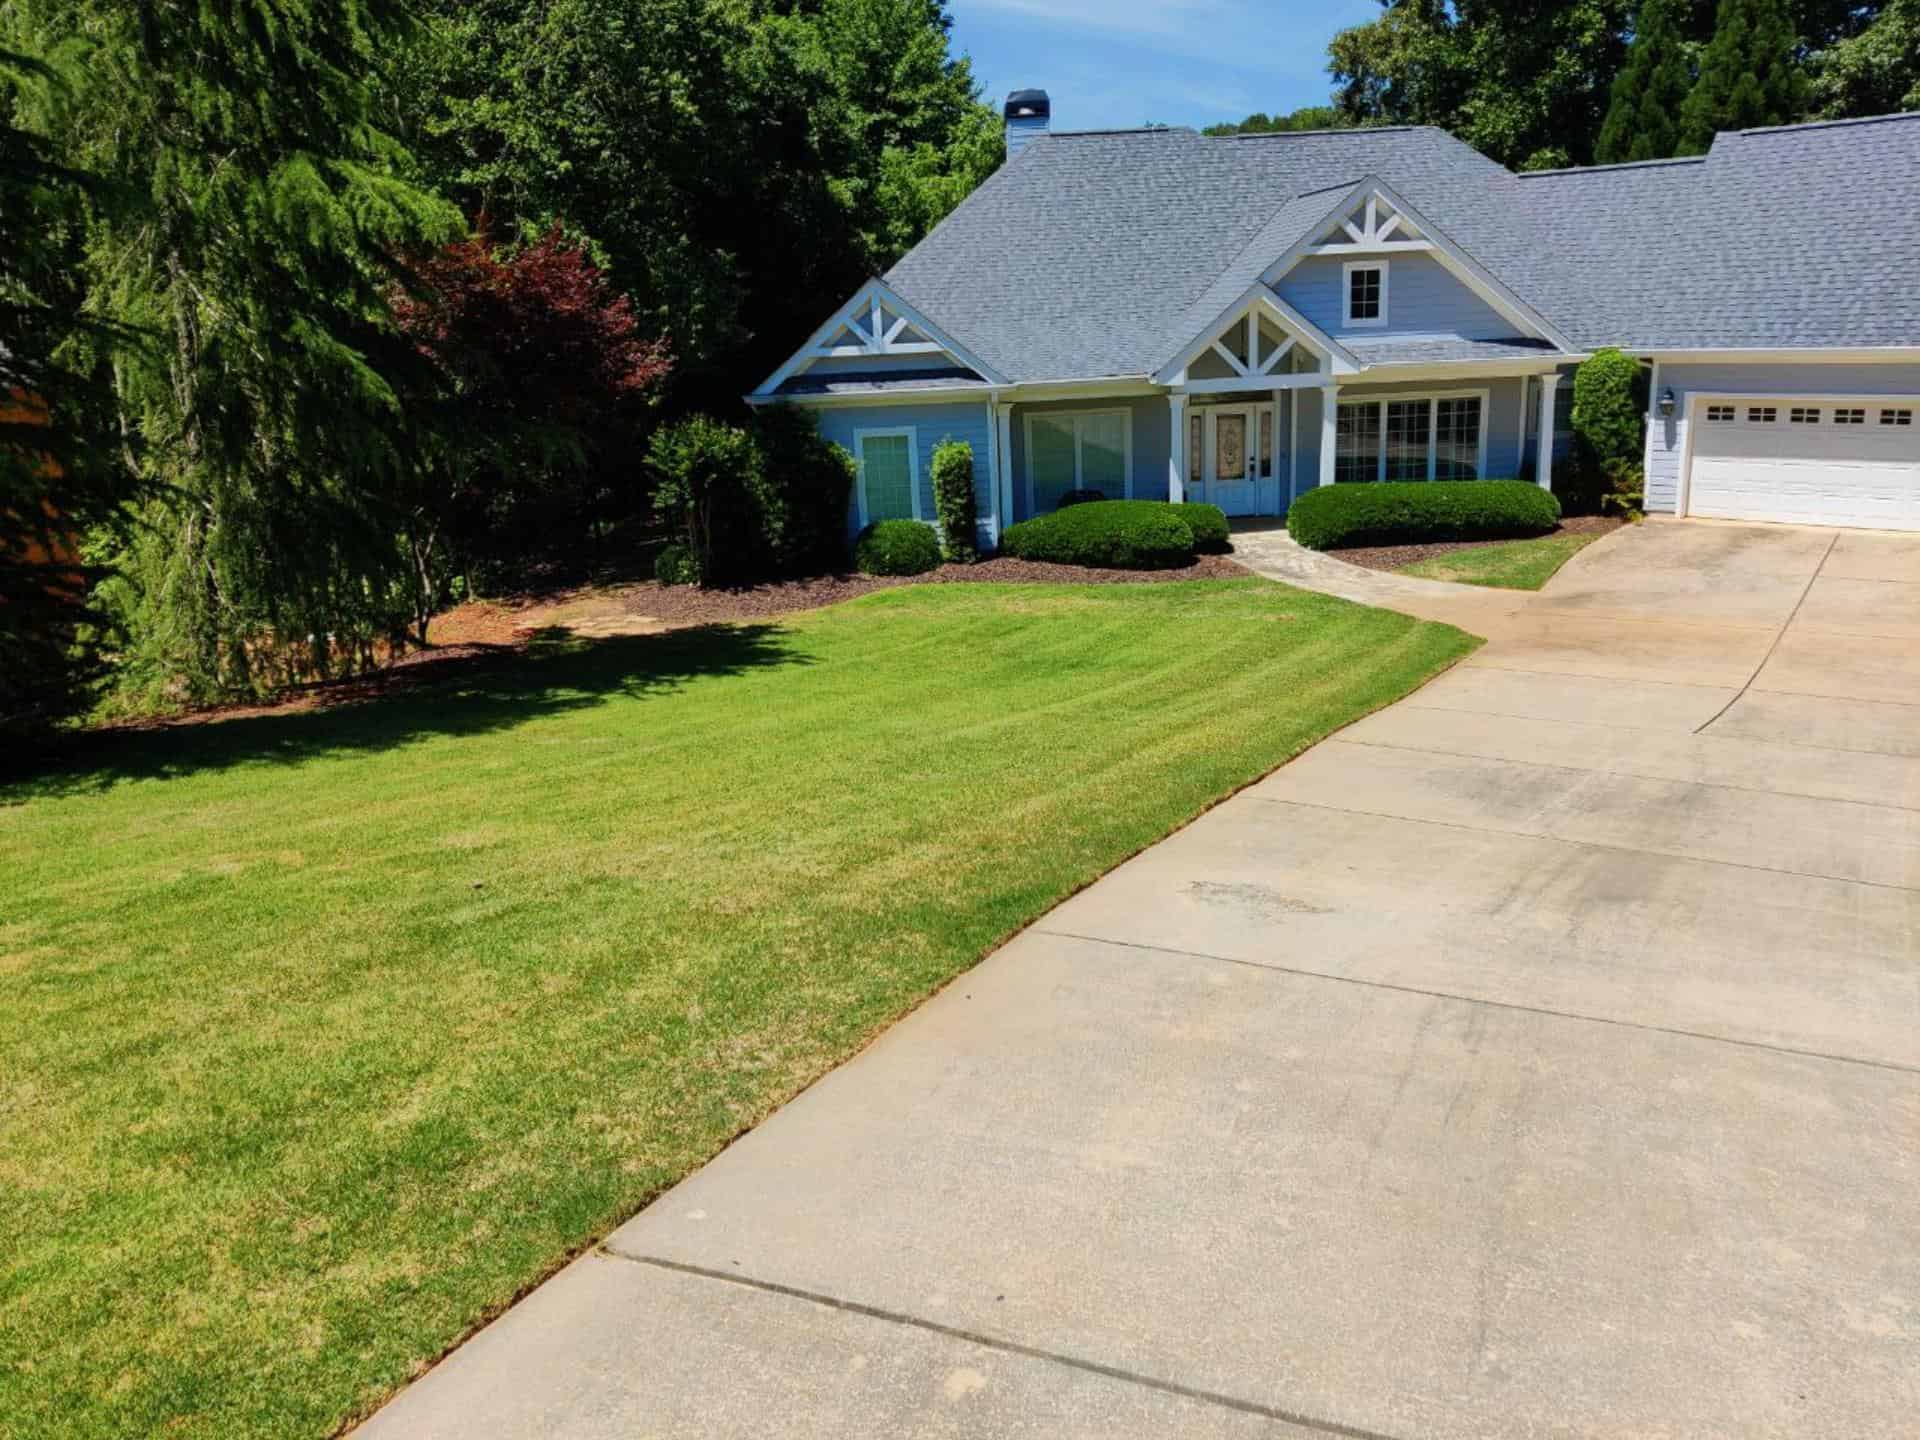 Residential Lawn Care Maintenance by Stepping Stone Lawn Care company - Buford - Flowery Branch - Suwanee - Sugar Hill - Georgia